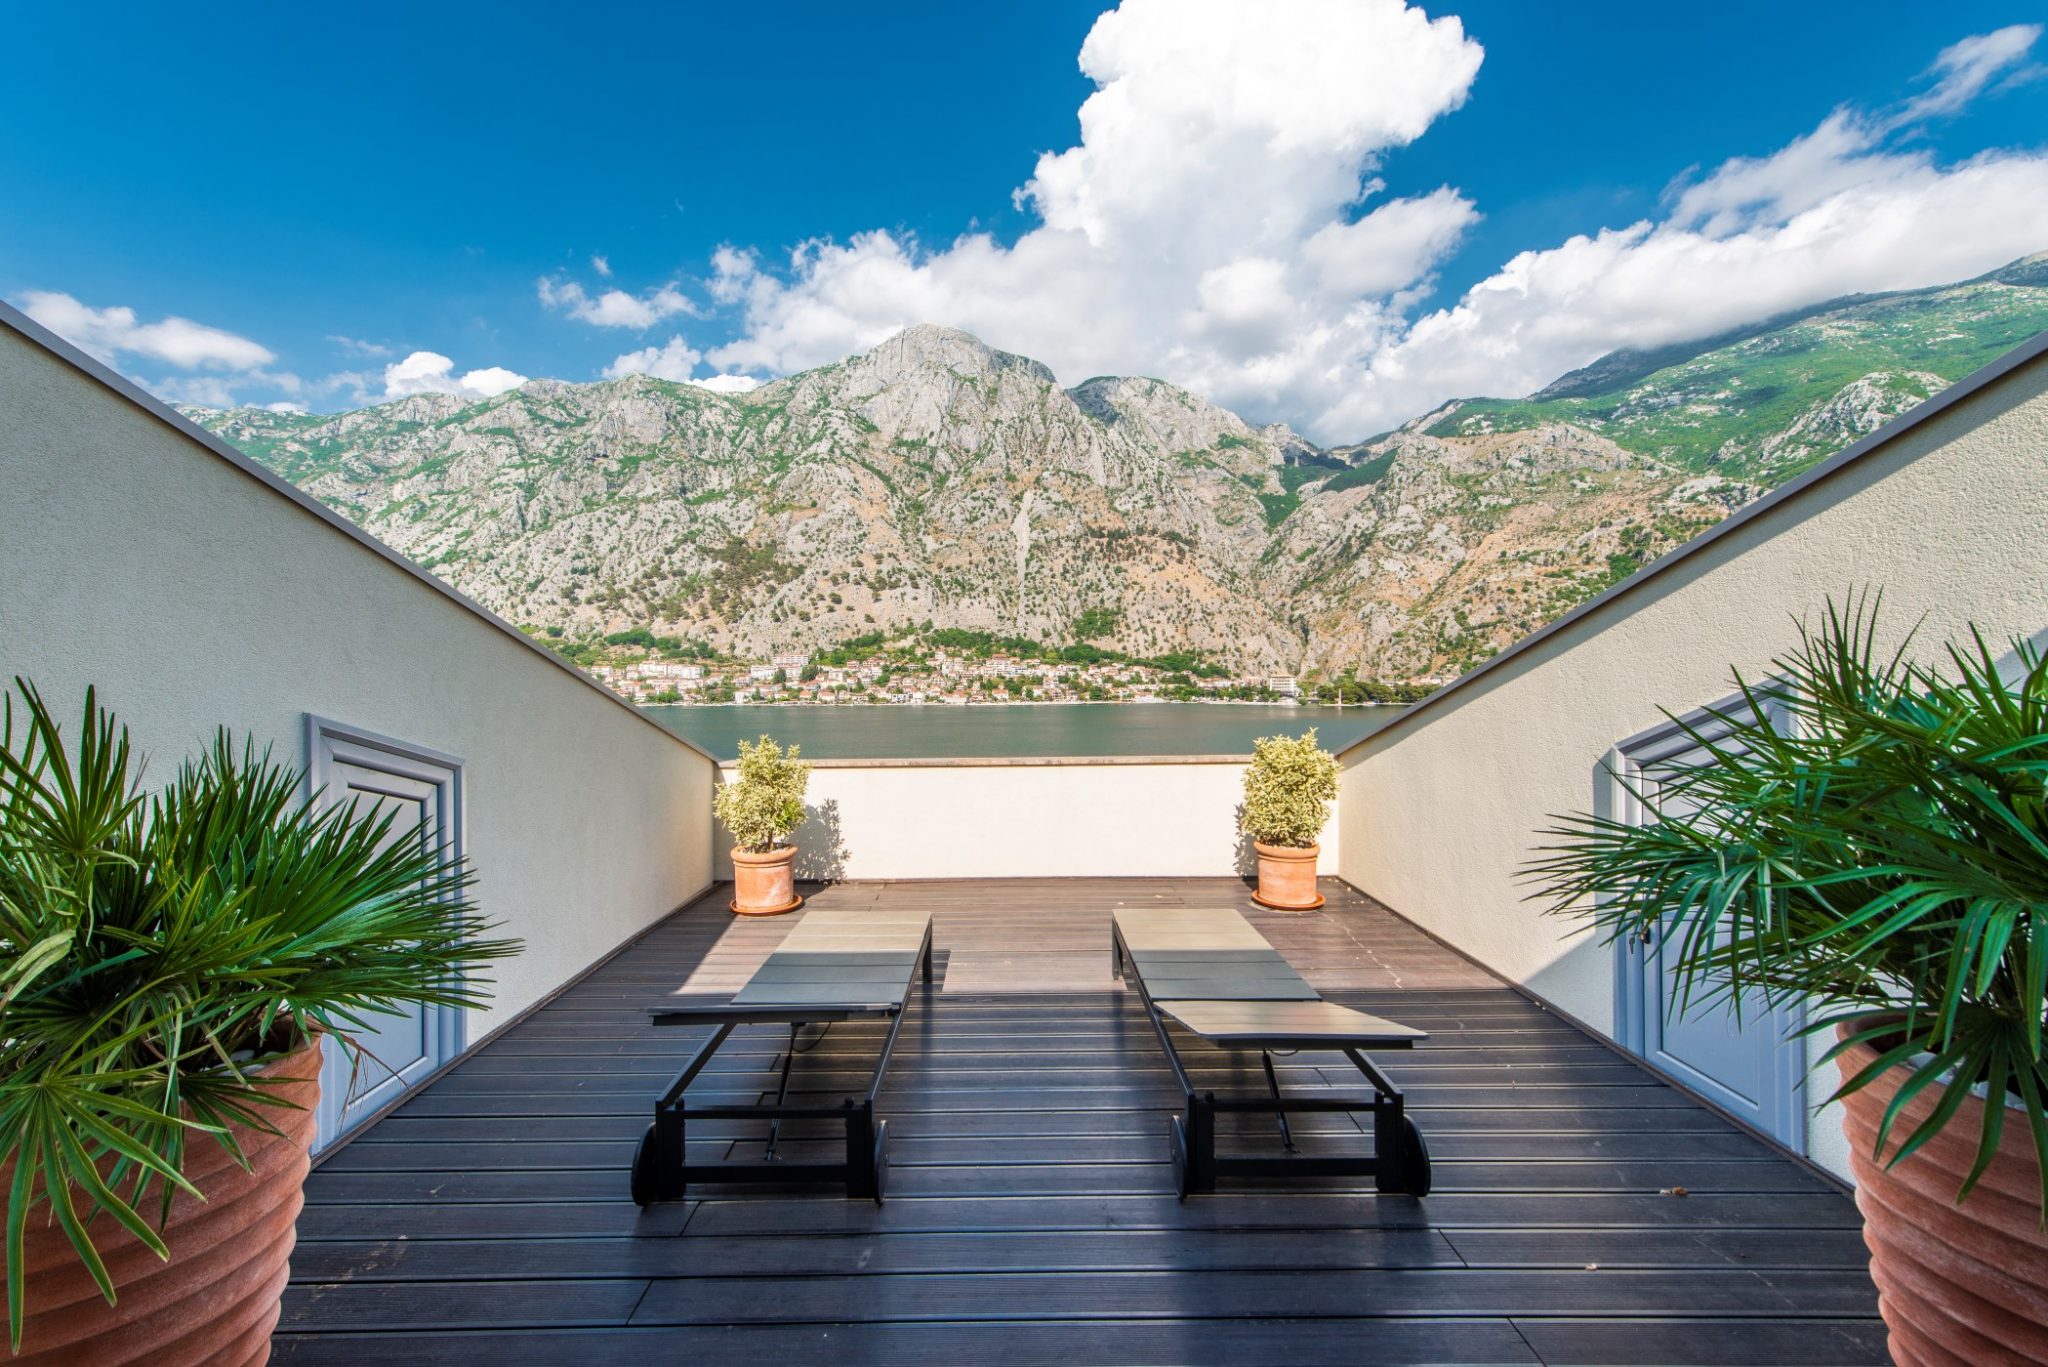 New modern villa near the sea in the village of Muo with a magnificent view of the bay